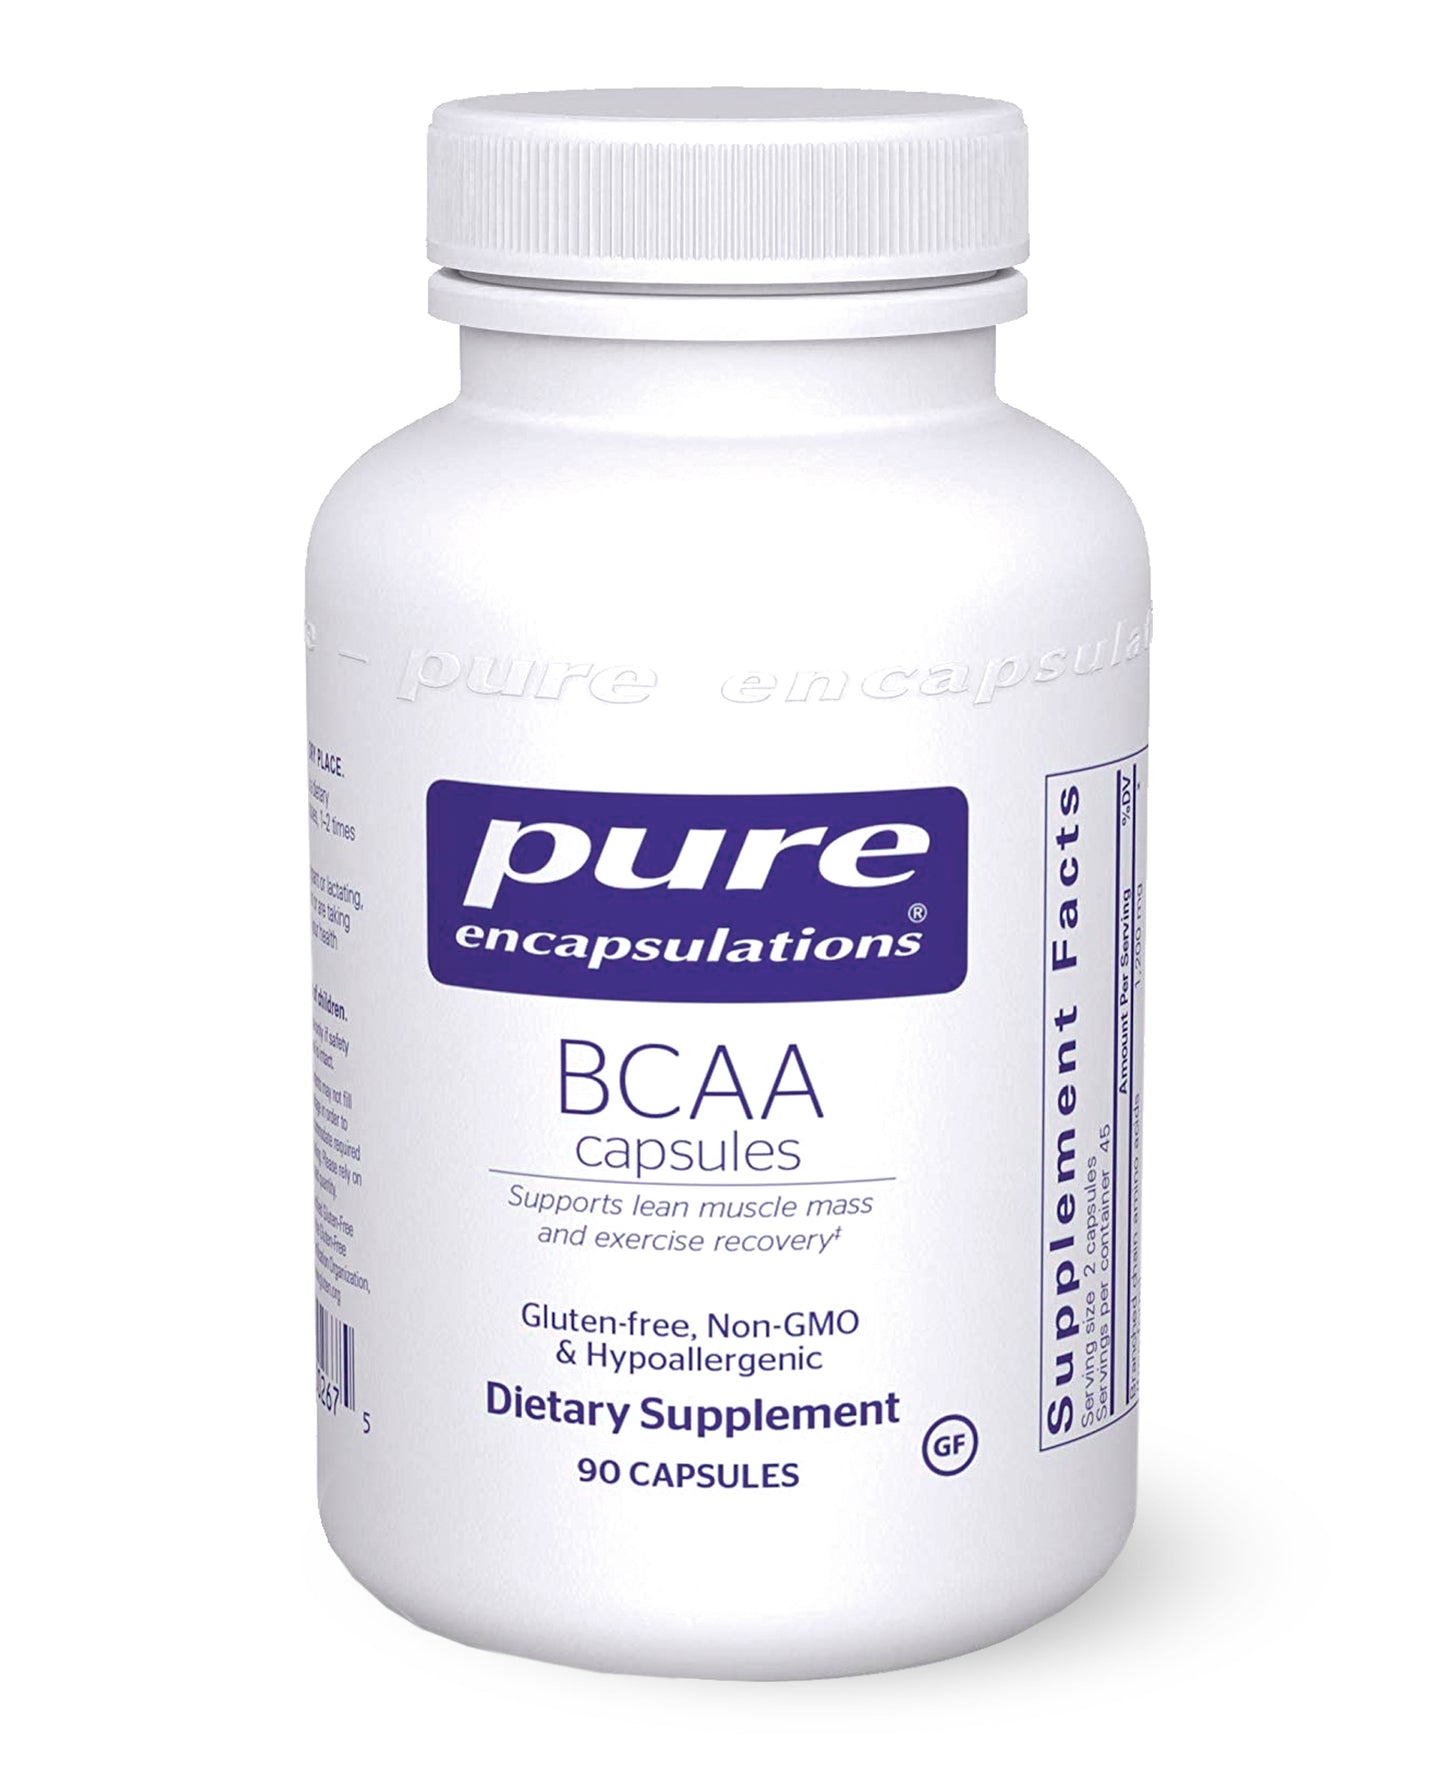 BCAA (Branched Chain Amino Acids)